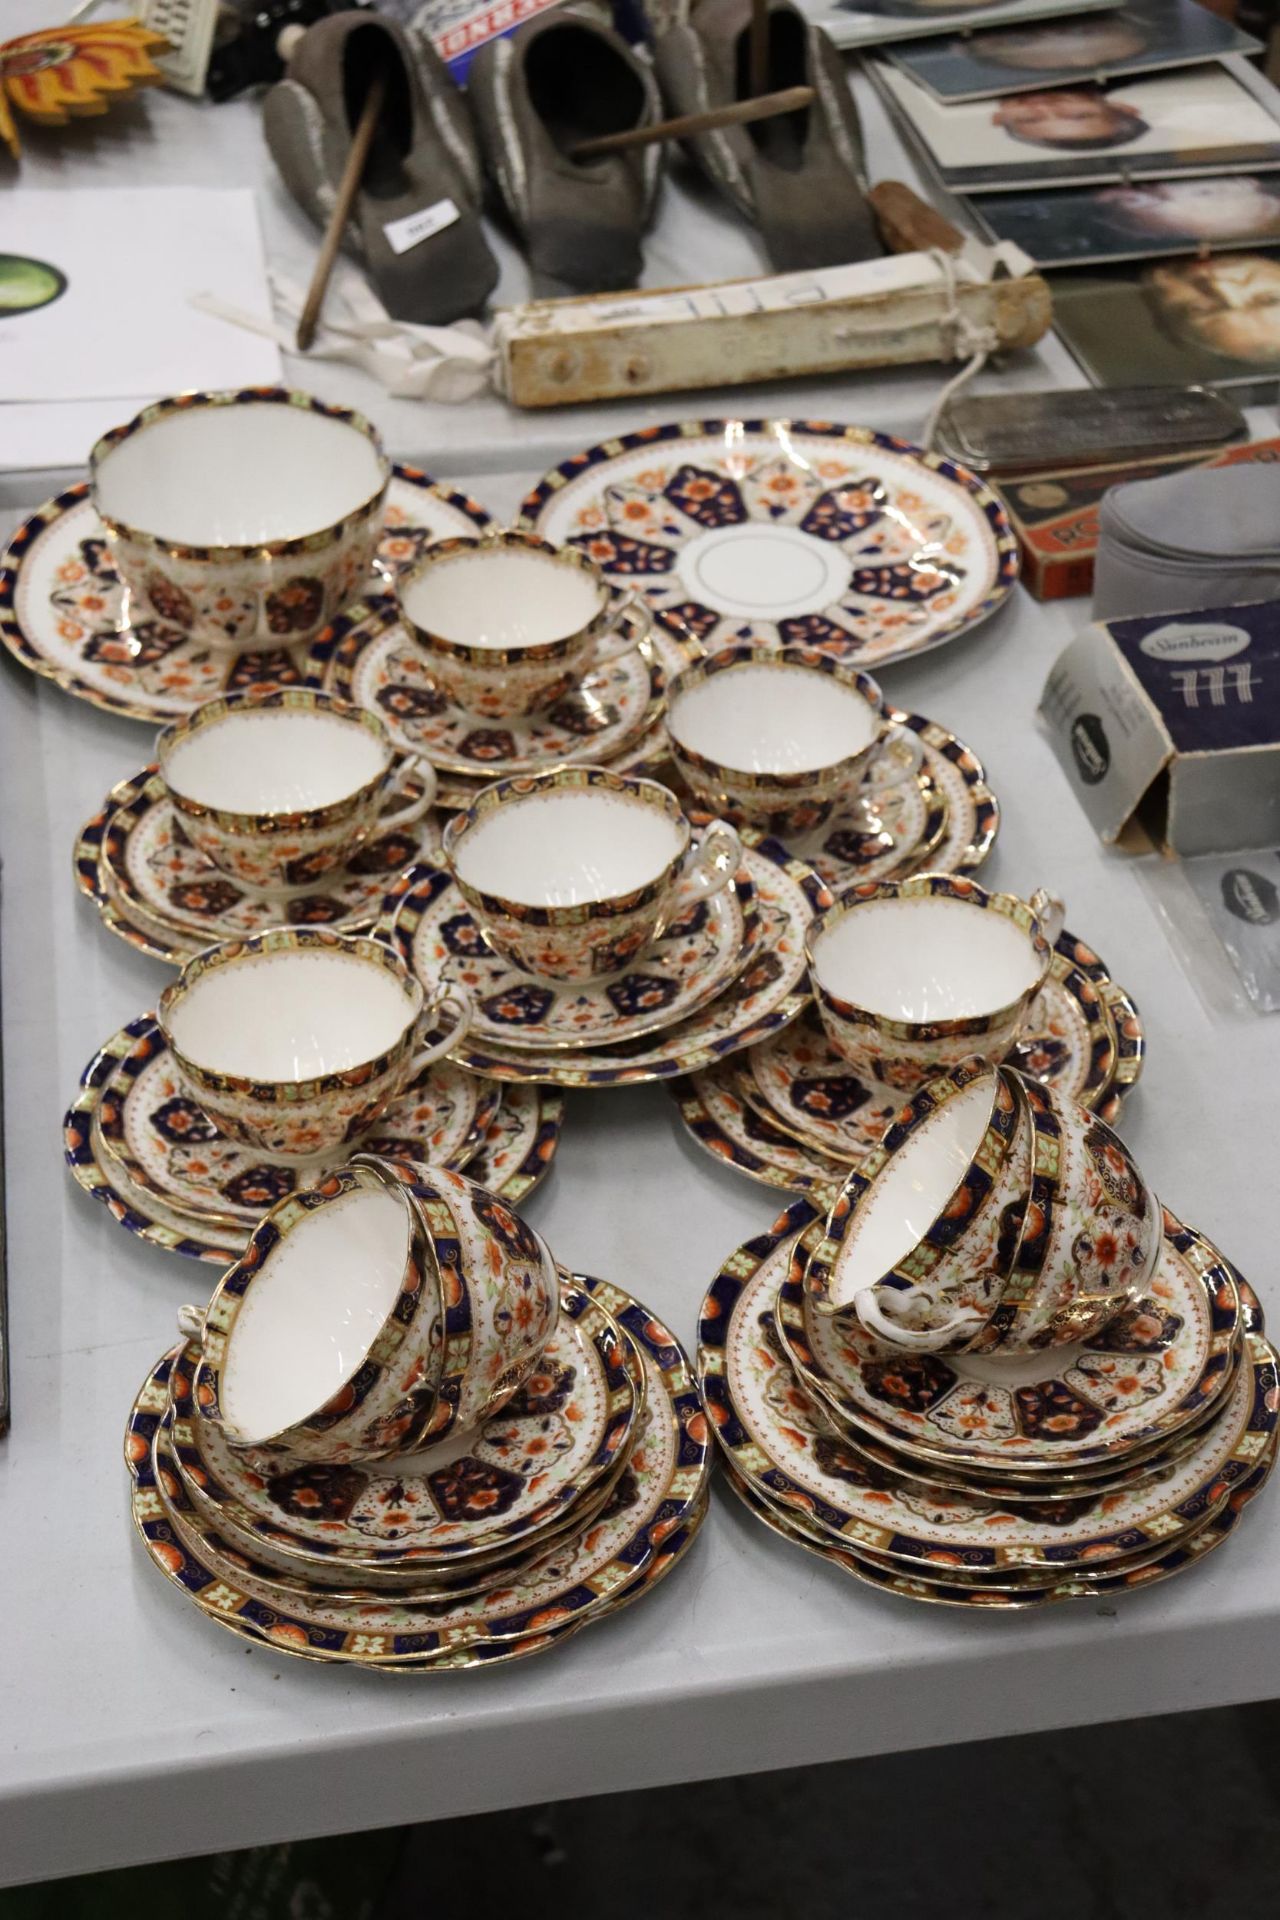 AN ANTIQUE 'COURT CHINA' TEASET TO INCLUDE CAKE PLATES, CUPS, SAUCERS, SIDE PLATES AND A SUGAR BOWL